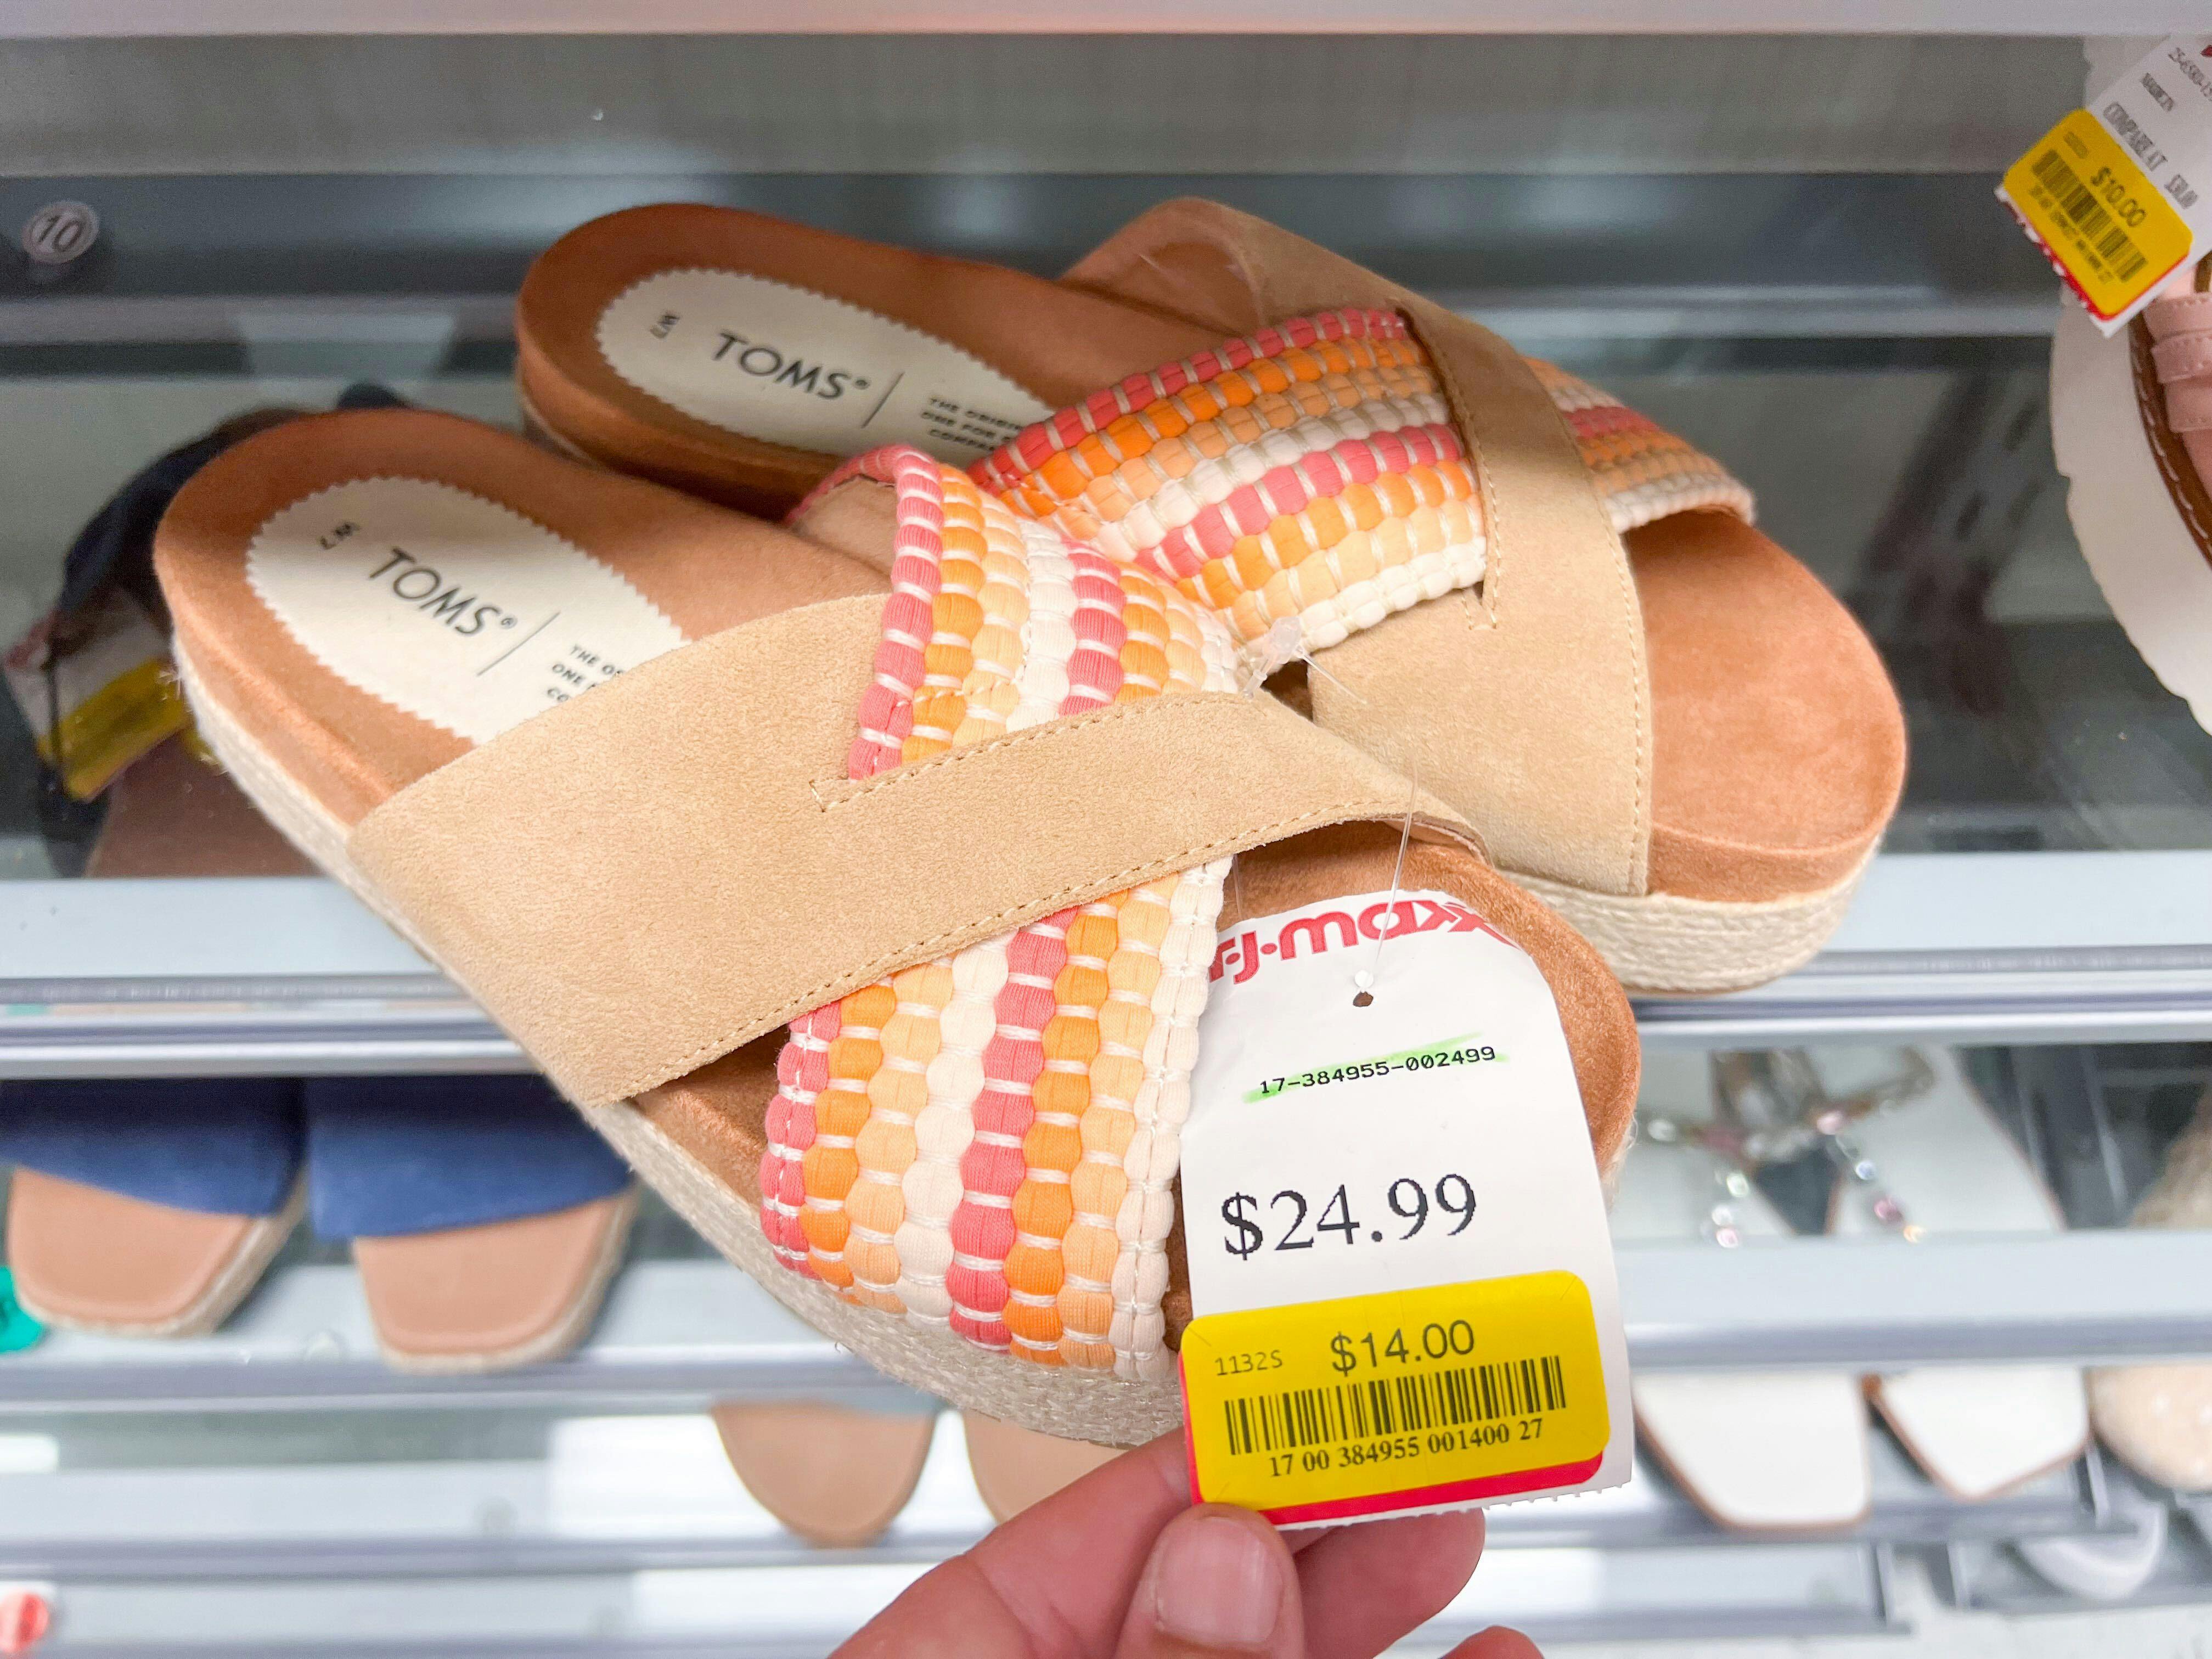 A pair of Toms sandals with a TJ Maxx clearance price tag for $14 on them.